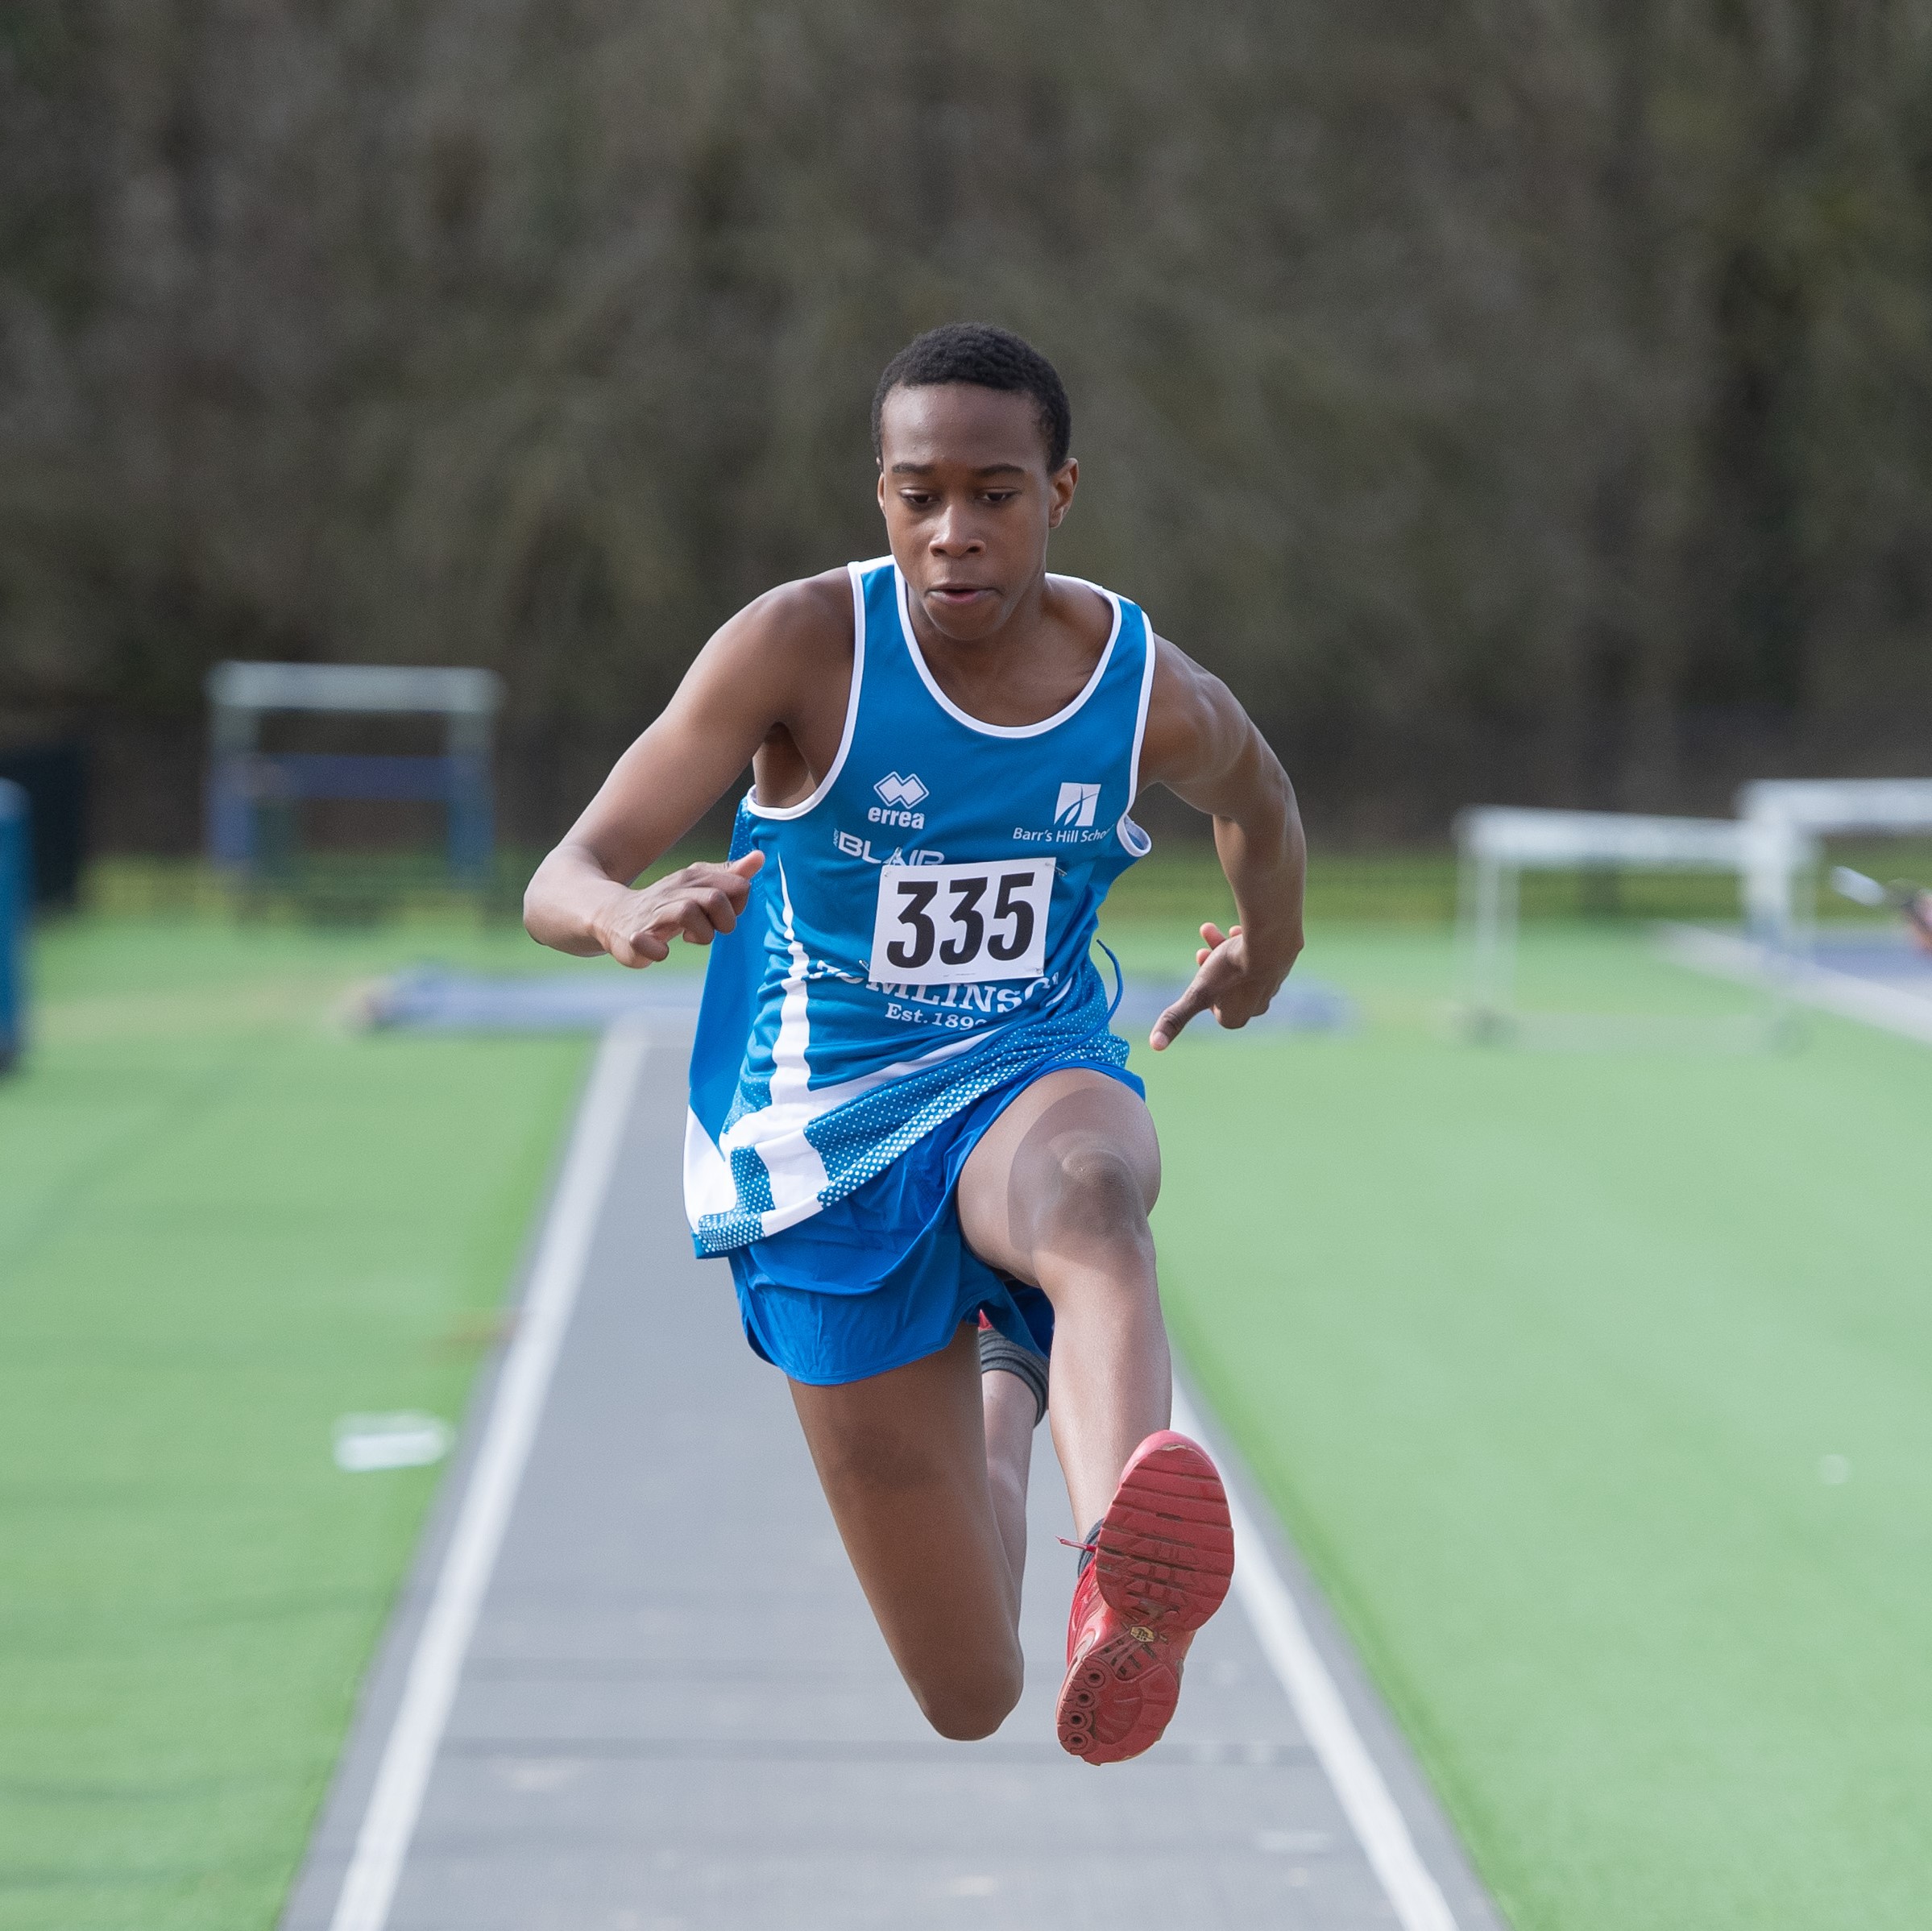 Athlete doing the long jump